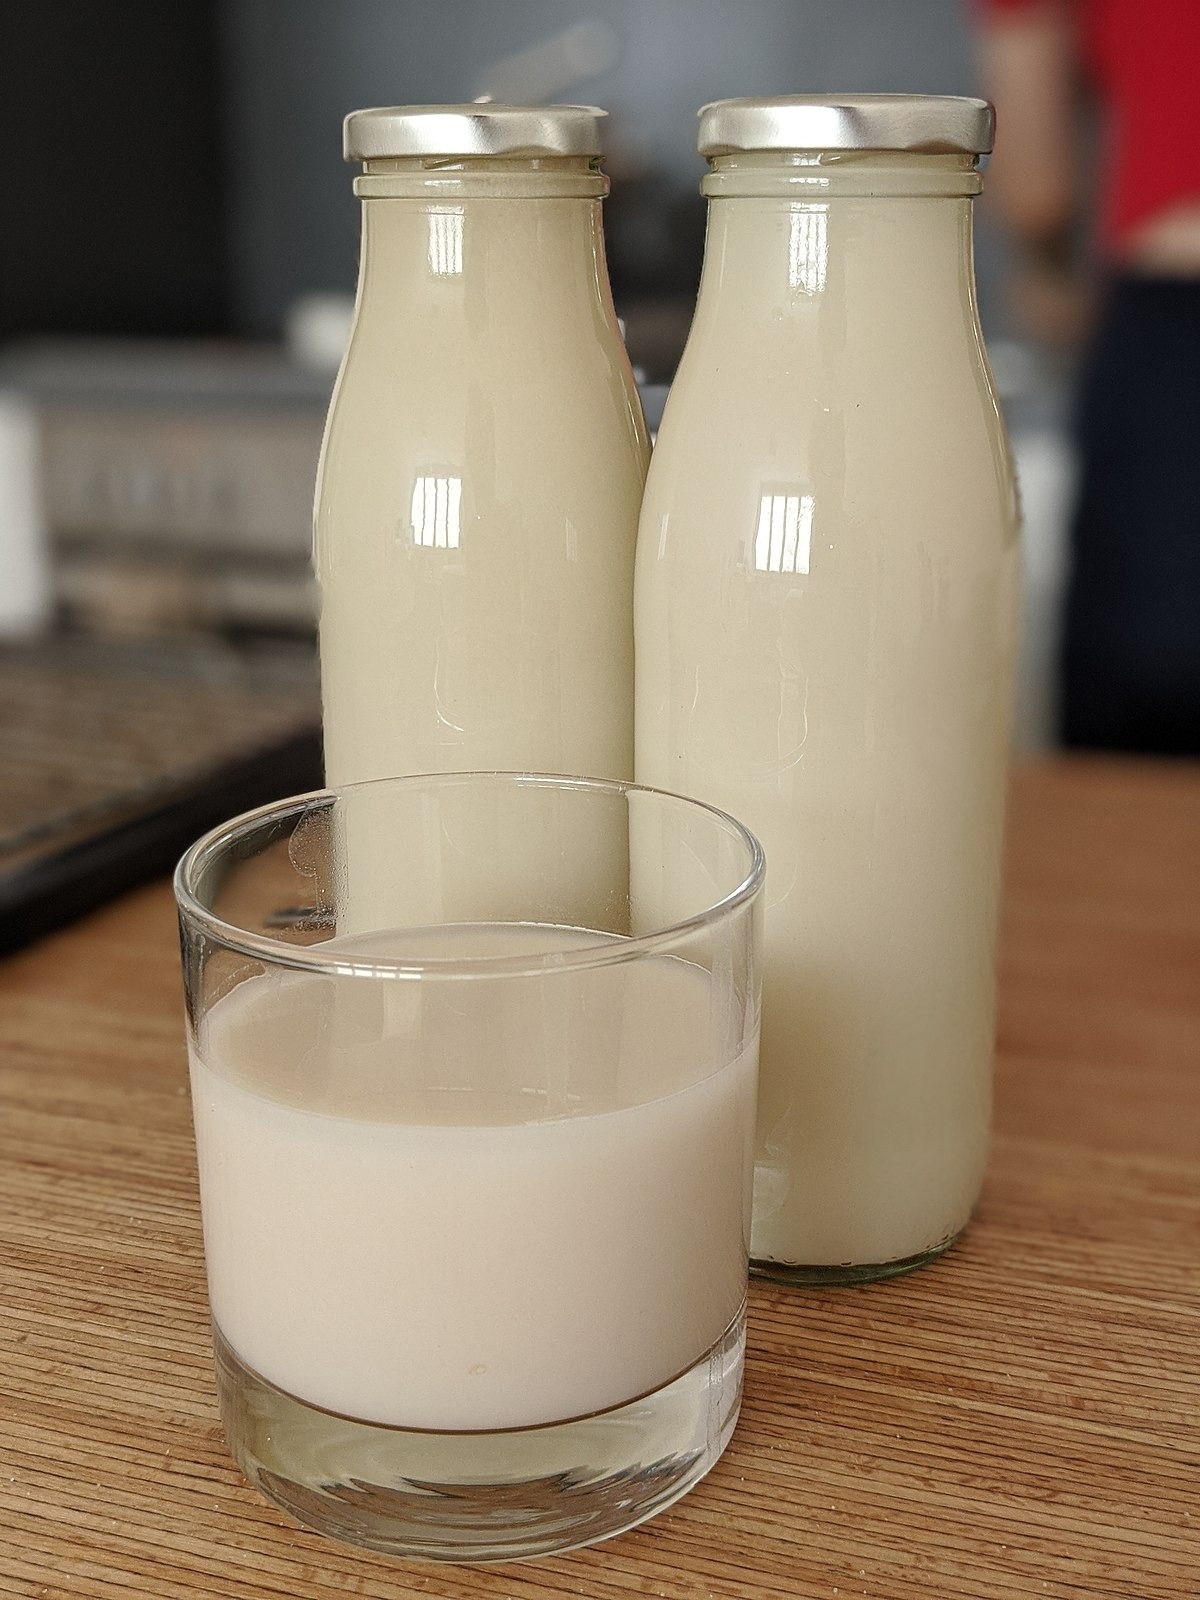 While some plant based milks date back to the 13th century, oat milk was invented in the 1990s. Rickard Öste developed oat milk while studying lactose intolerance at Lund University in Sweden.